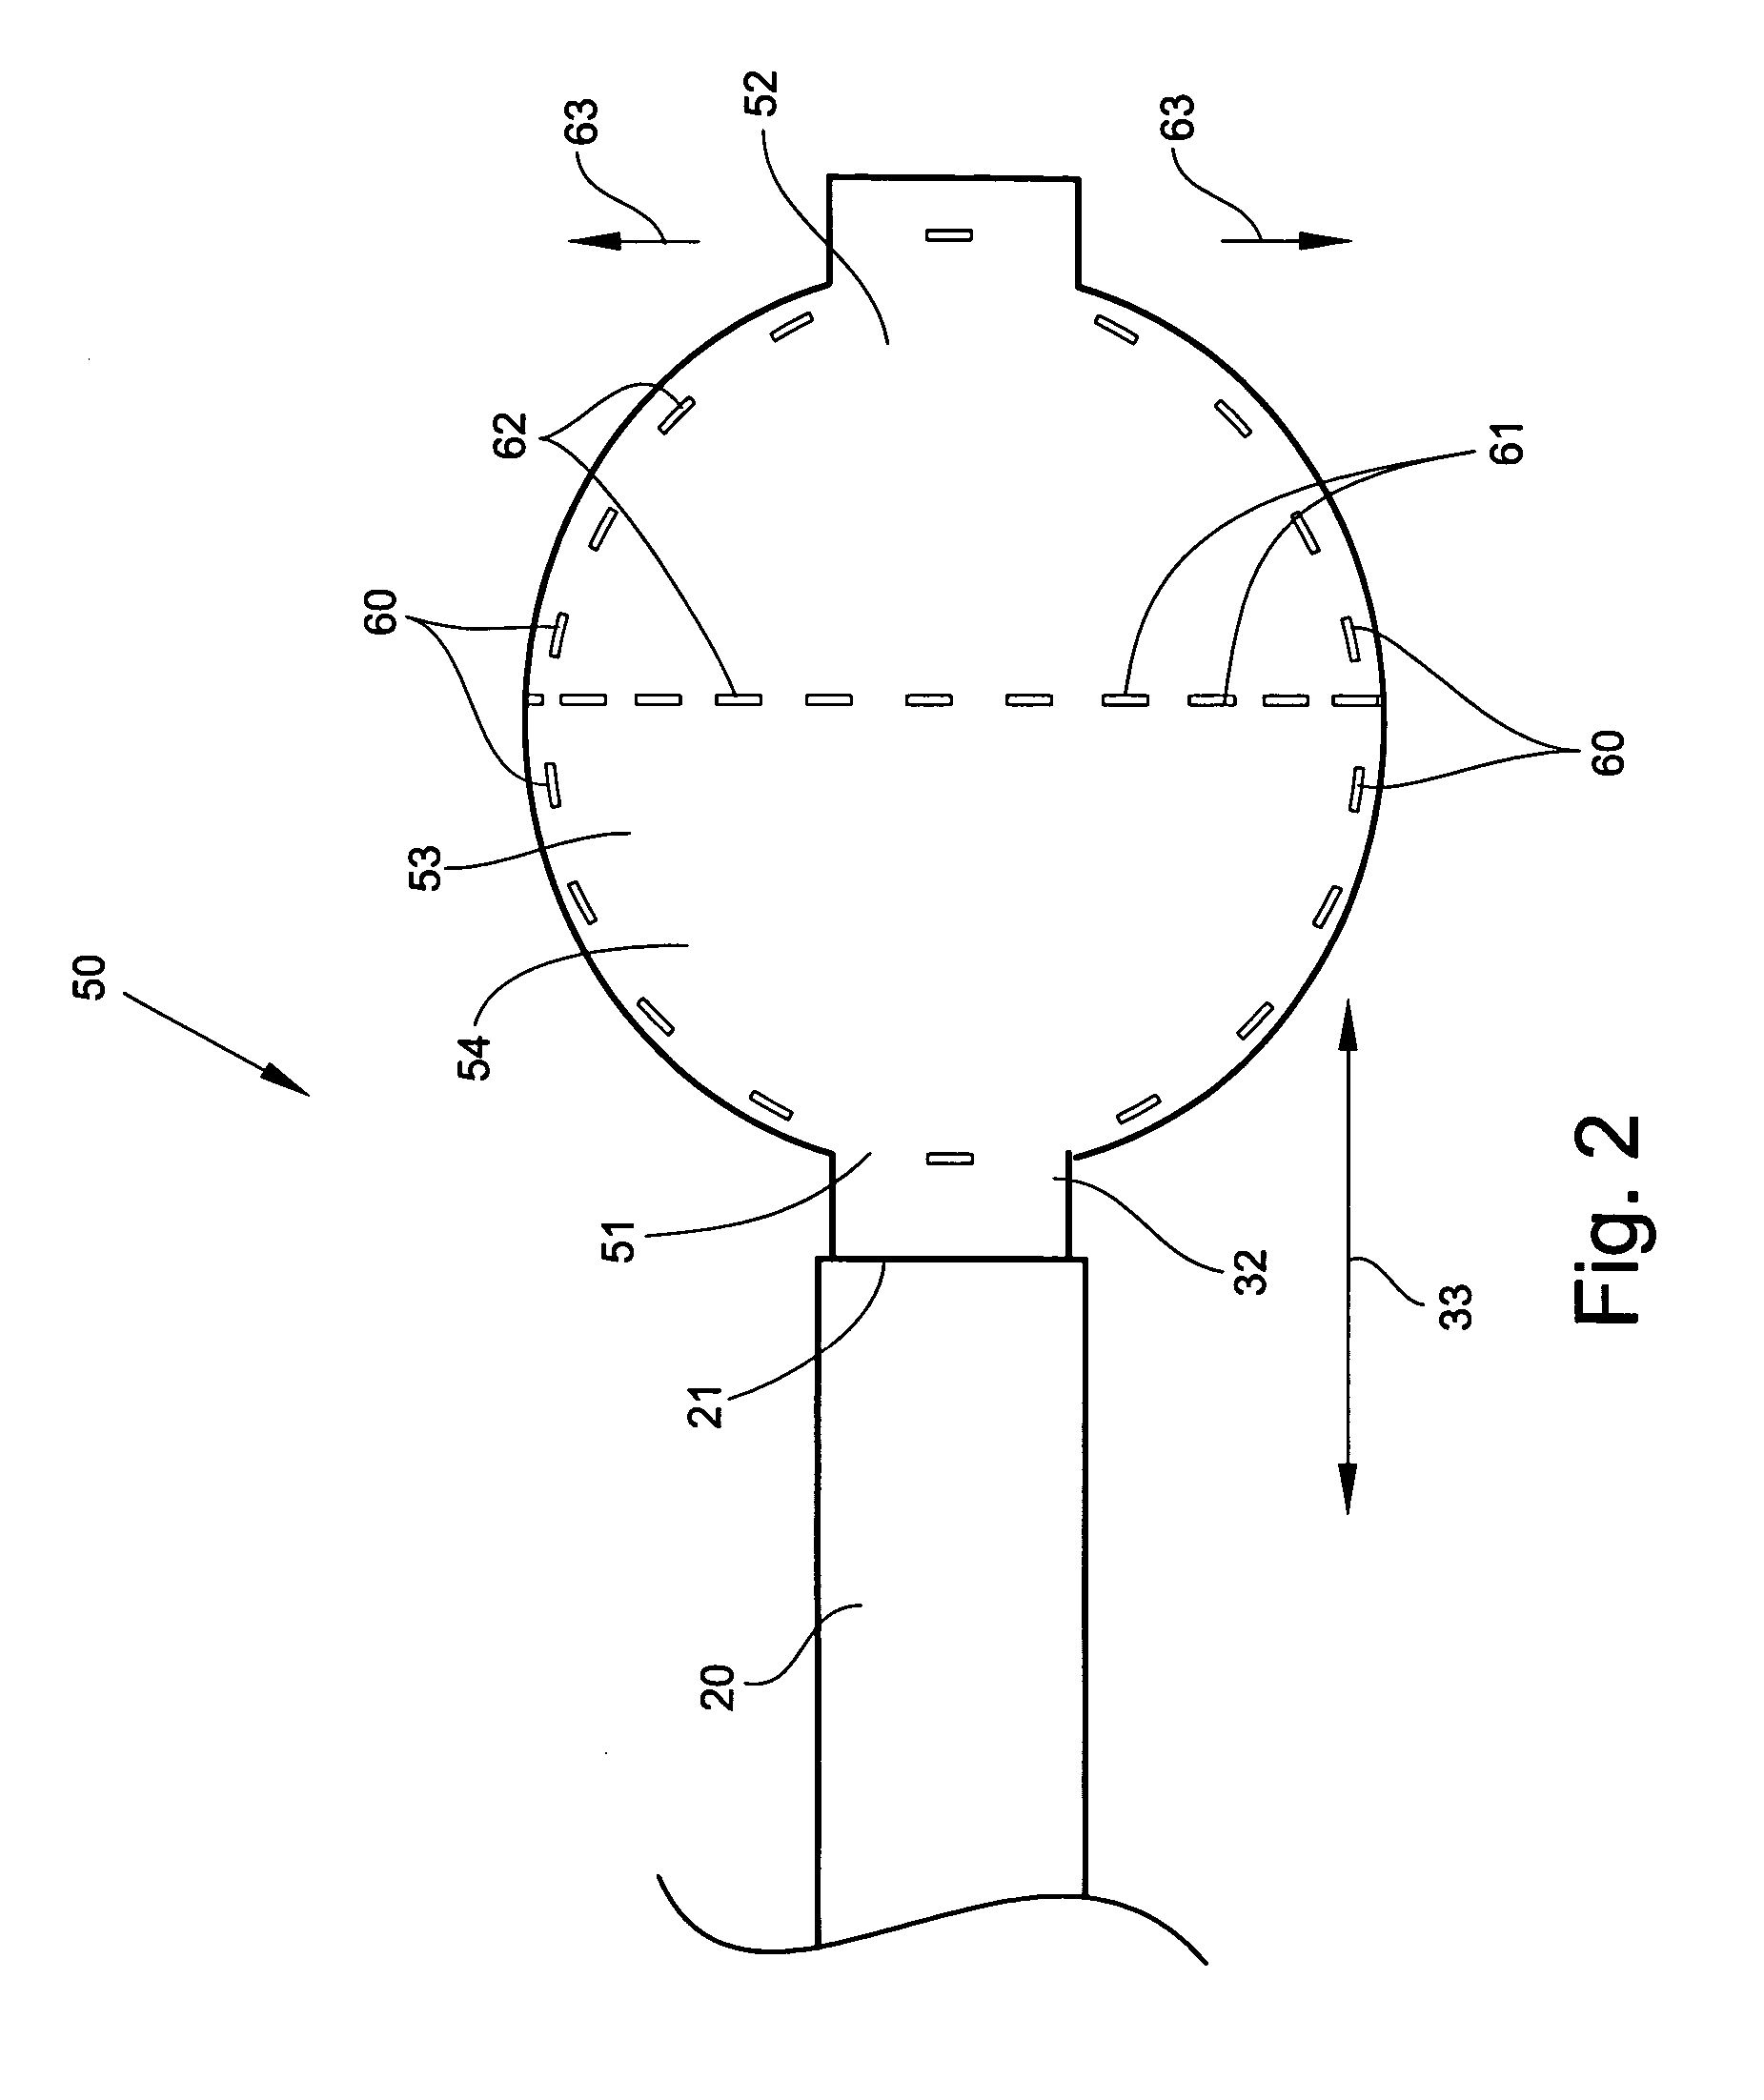 Radiopaque expandable body and methods